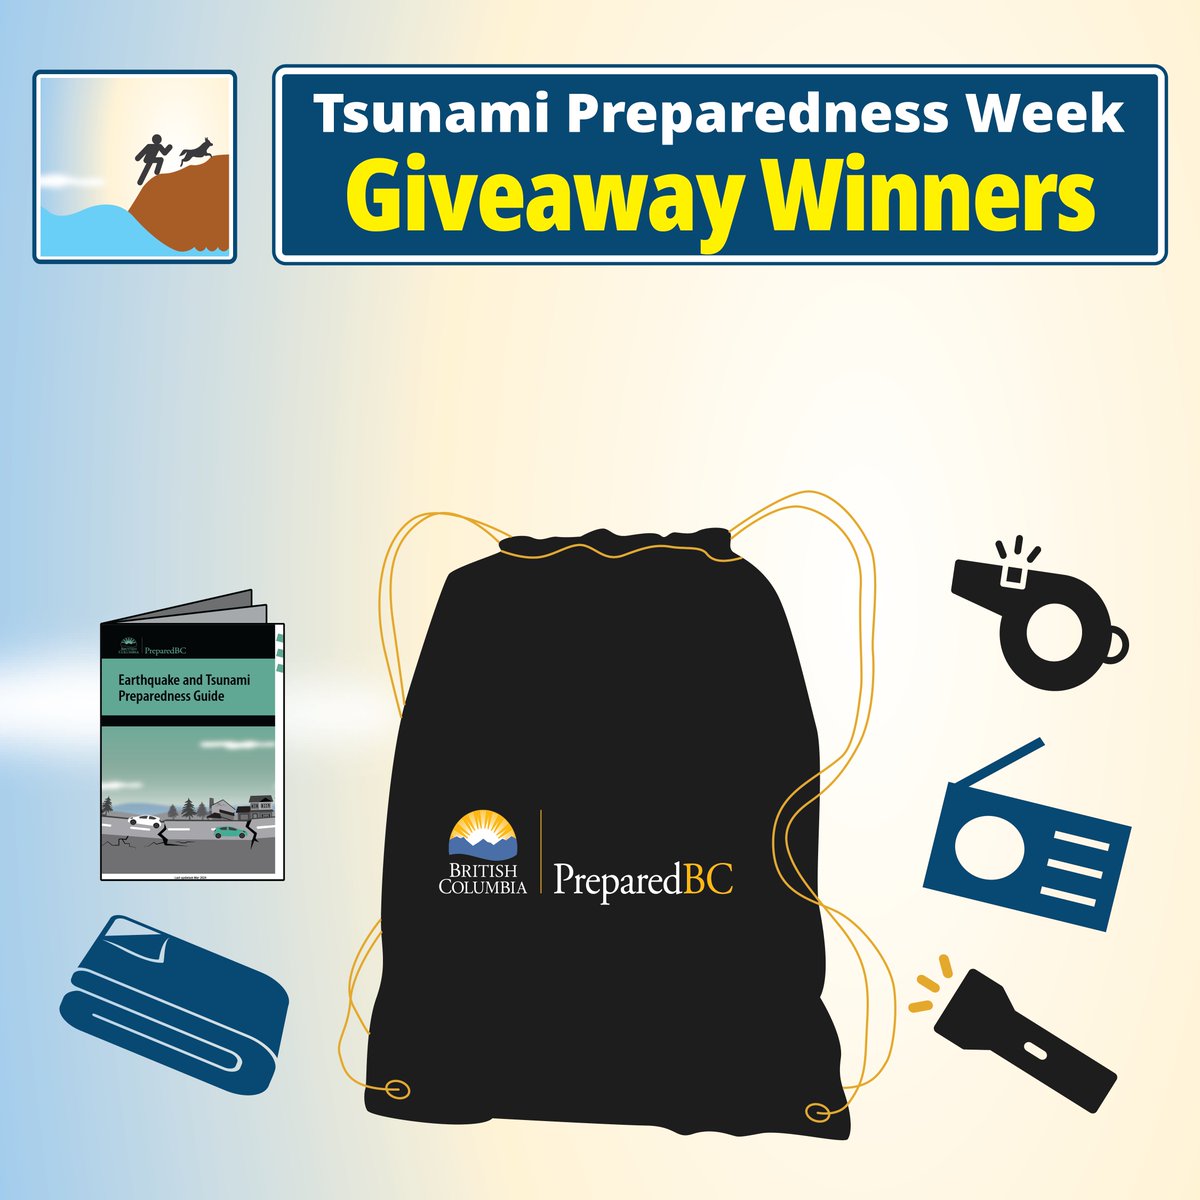 THANK YOU to all who participated in our Tsunami Preparedness Week giveaway for a chance to win a starter grab-and-go bag 🌊 We had more than xx contest entries. After doing a random draw, we’ve now sent private messages to all winners. Learn more: PreparedBC.ca/tsunamis 👈